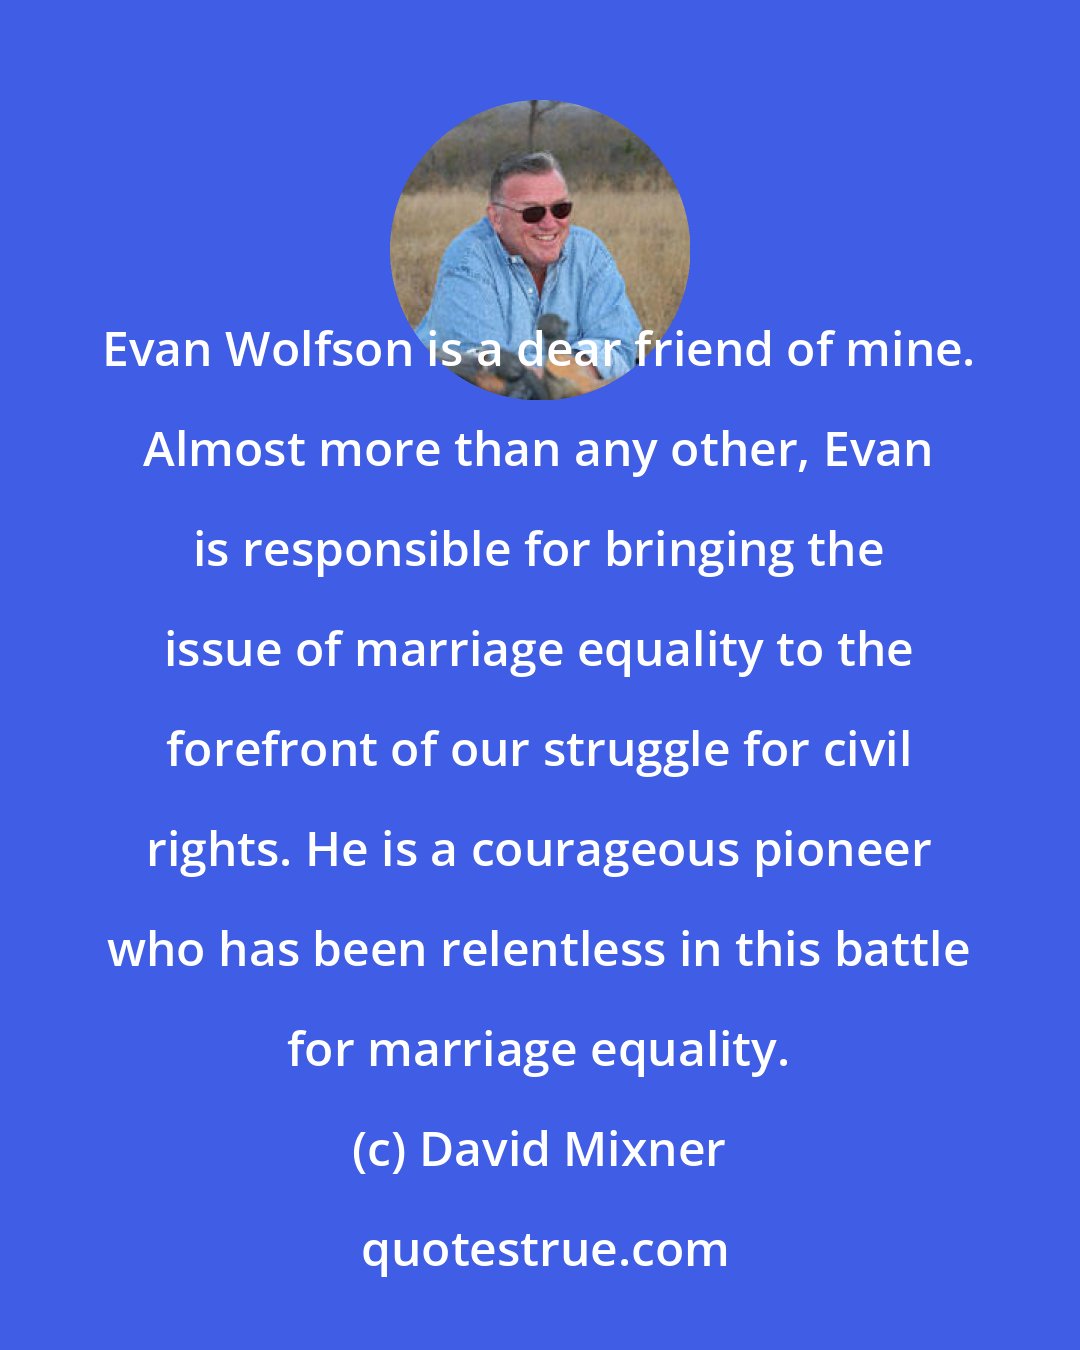 David Mixner: Evan Wolfson is a dear friend of mine. Almost more than any other, Evan is responsible for bringing the issue of marriage equality to the forefront of our struggle for civil rights. He is a courageous pioneer who has been relentless in this battle for marriage equality.